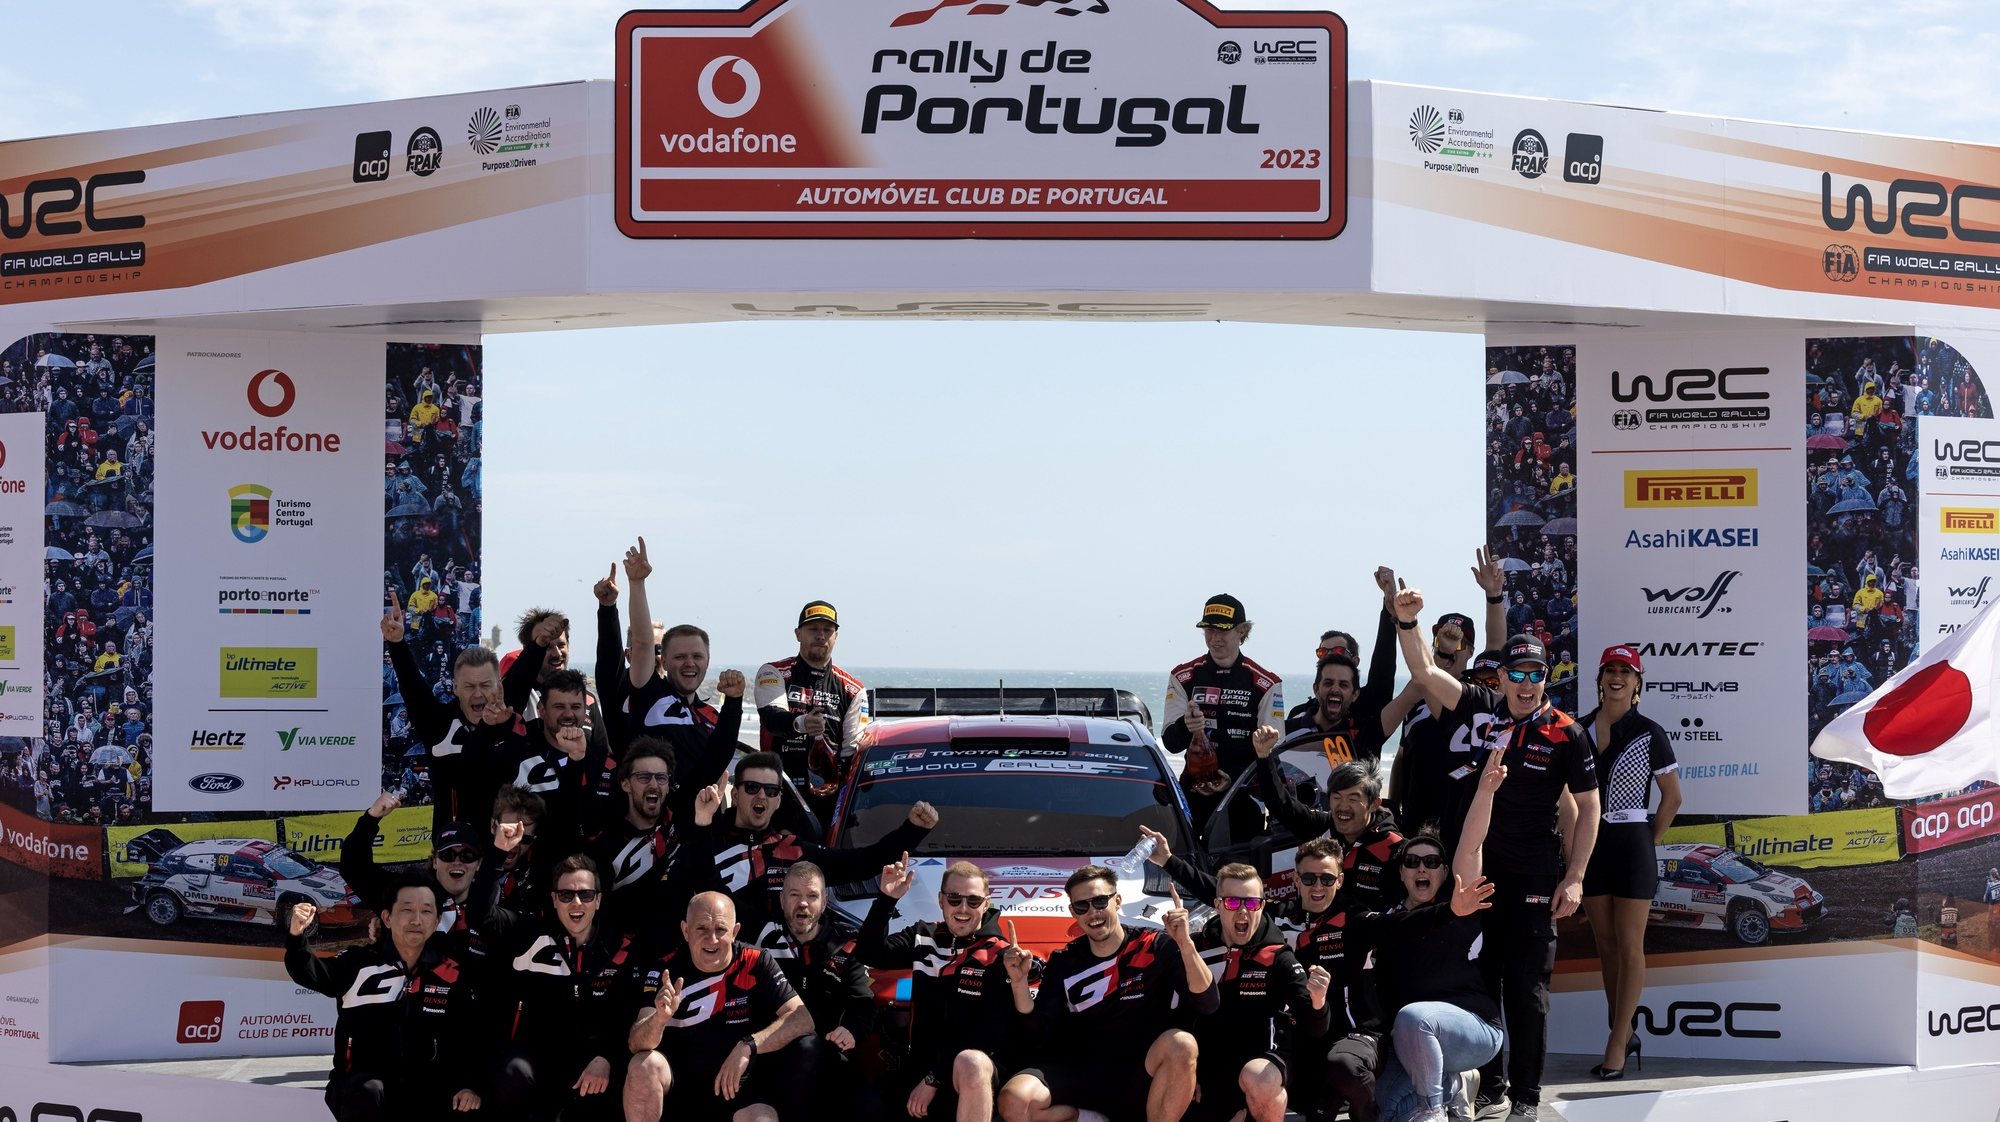 Toyota team celebrate after winning the Rally Portugal 2023 as part of the World Rally Championship (WRC) in Matosinhos, Portugal,, 14 May 2023. JOSE COELHO/LUSA